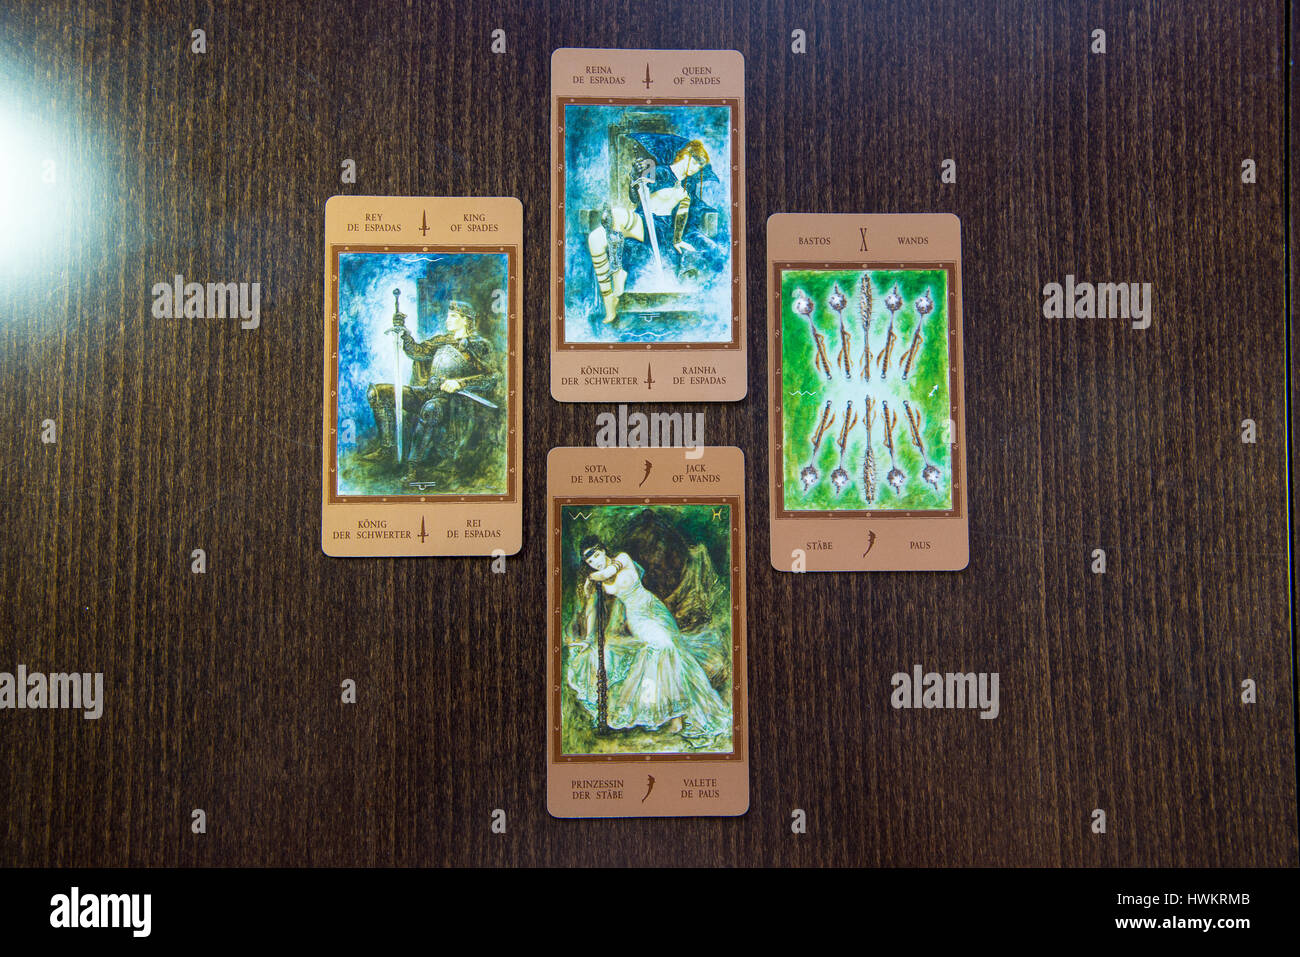 Moscow, Russia - January 29, 2017: Tarot cards on the wood. Labirinth tarot deck. Esoteric background Stock Photo